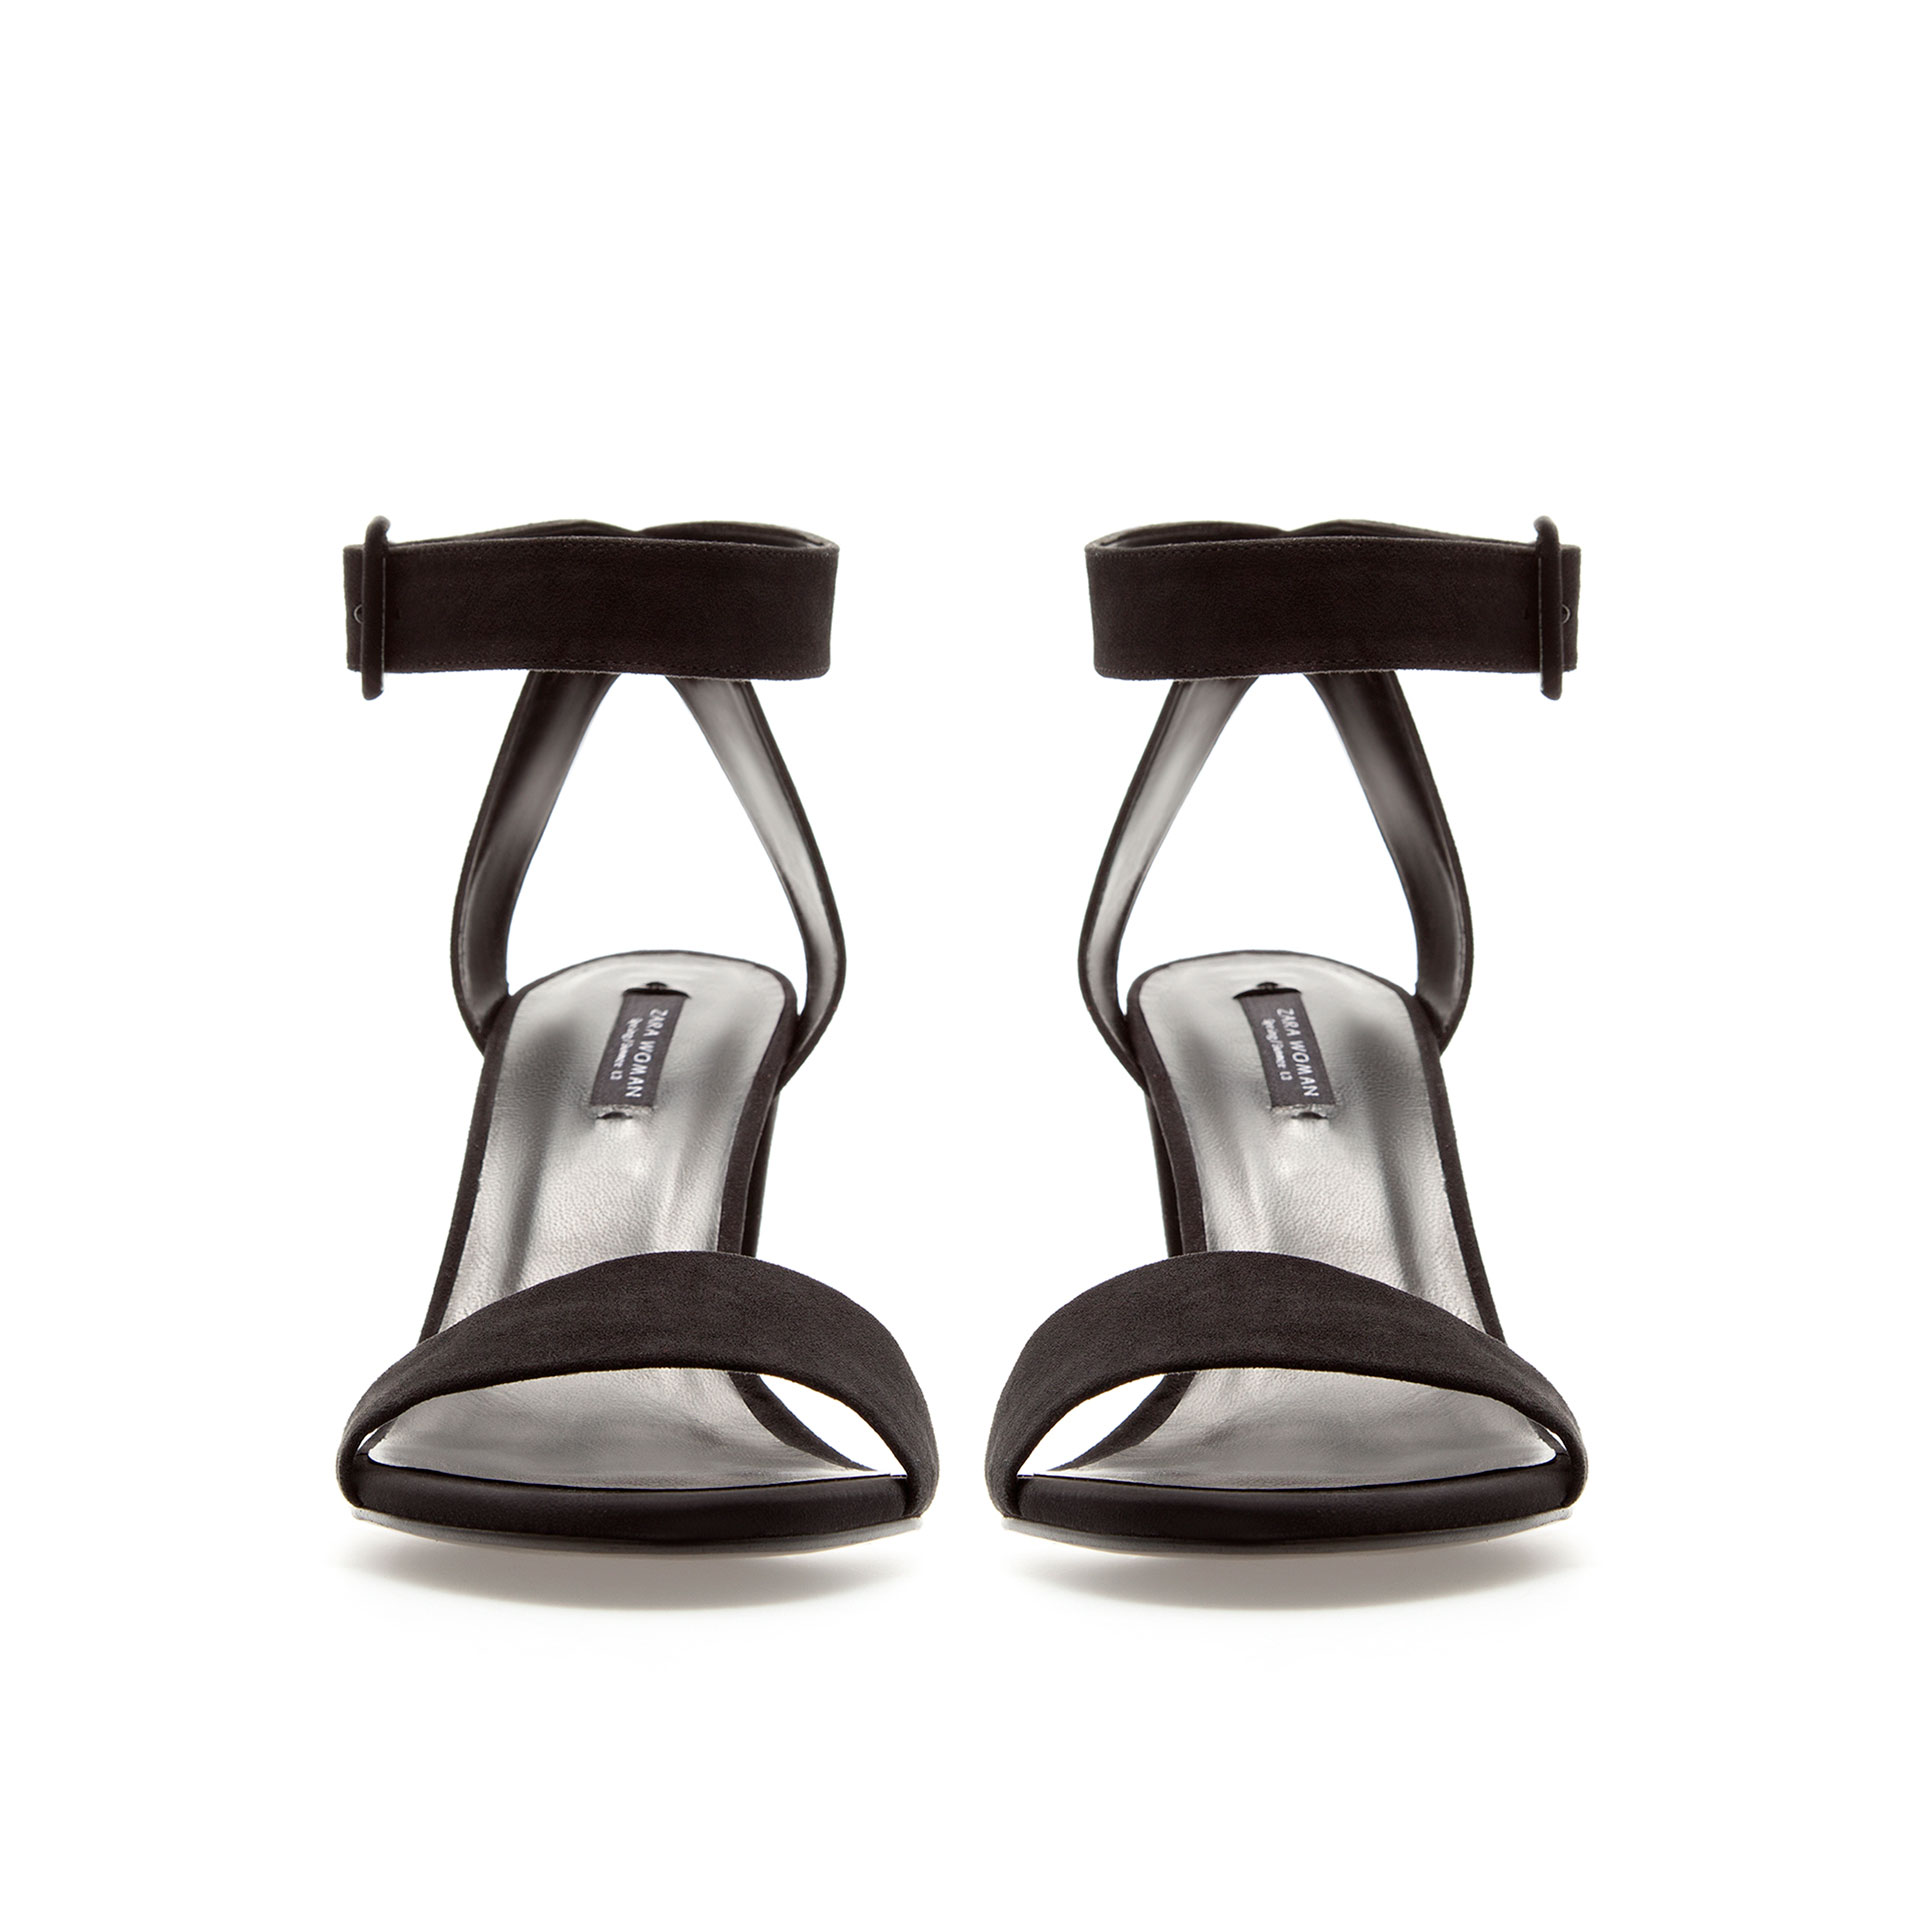 Zara Mid Heel Sandals with Ankle Strap in Black | Lyst